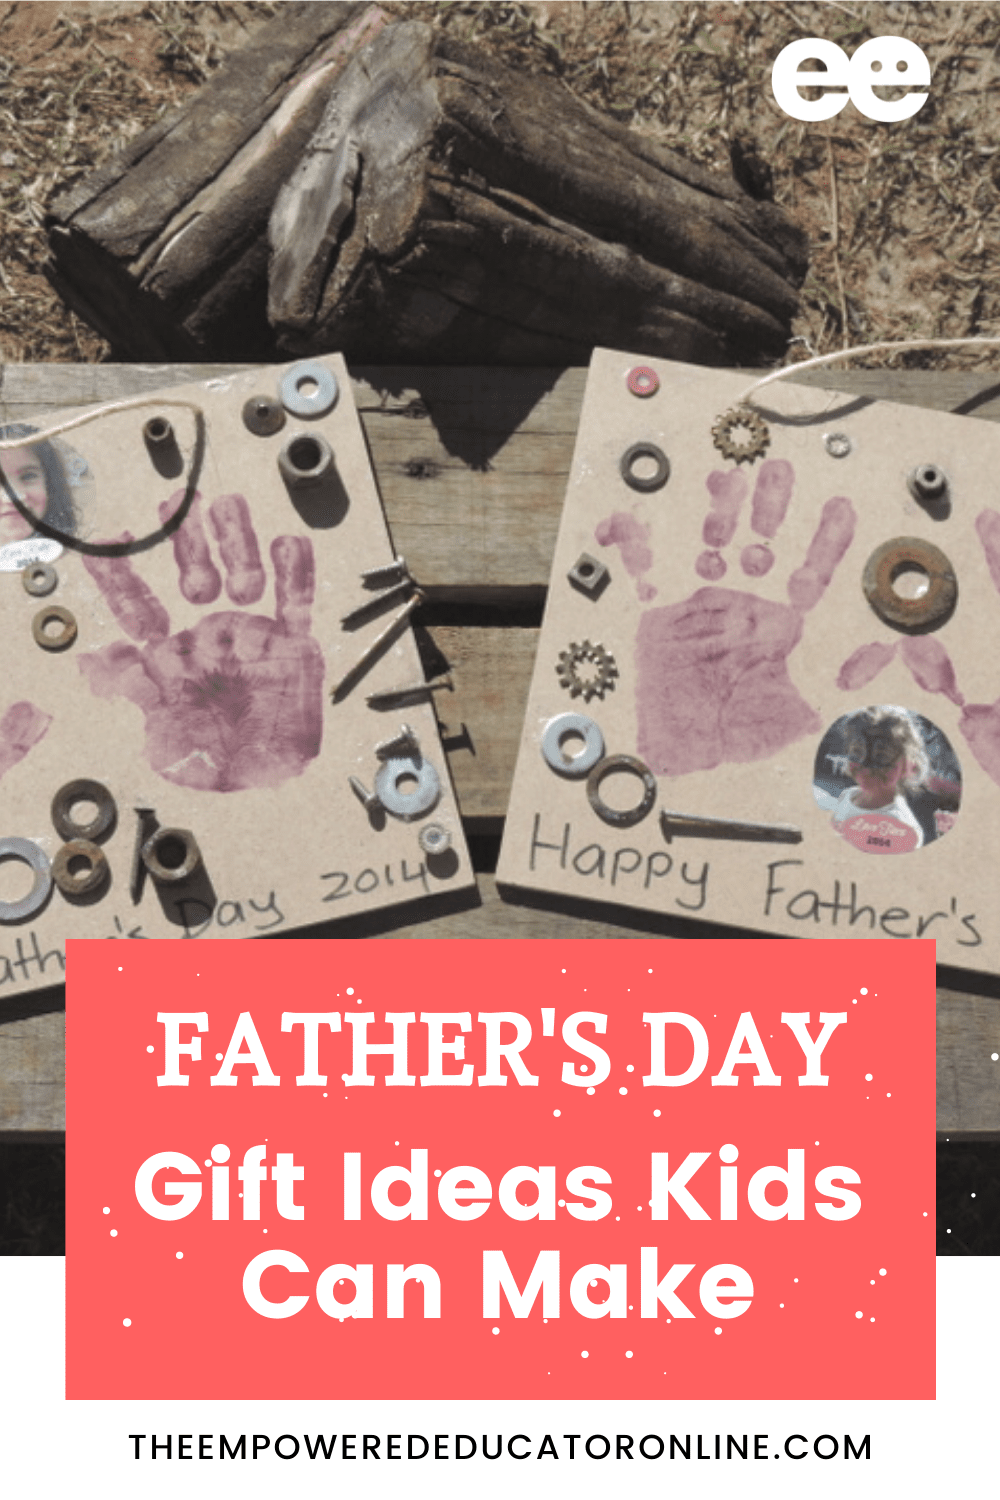 Children’s Handmade Gifts for Father’s Day